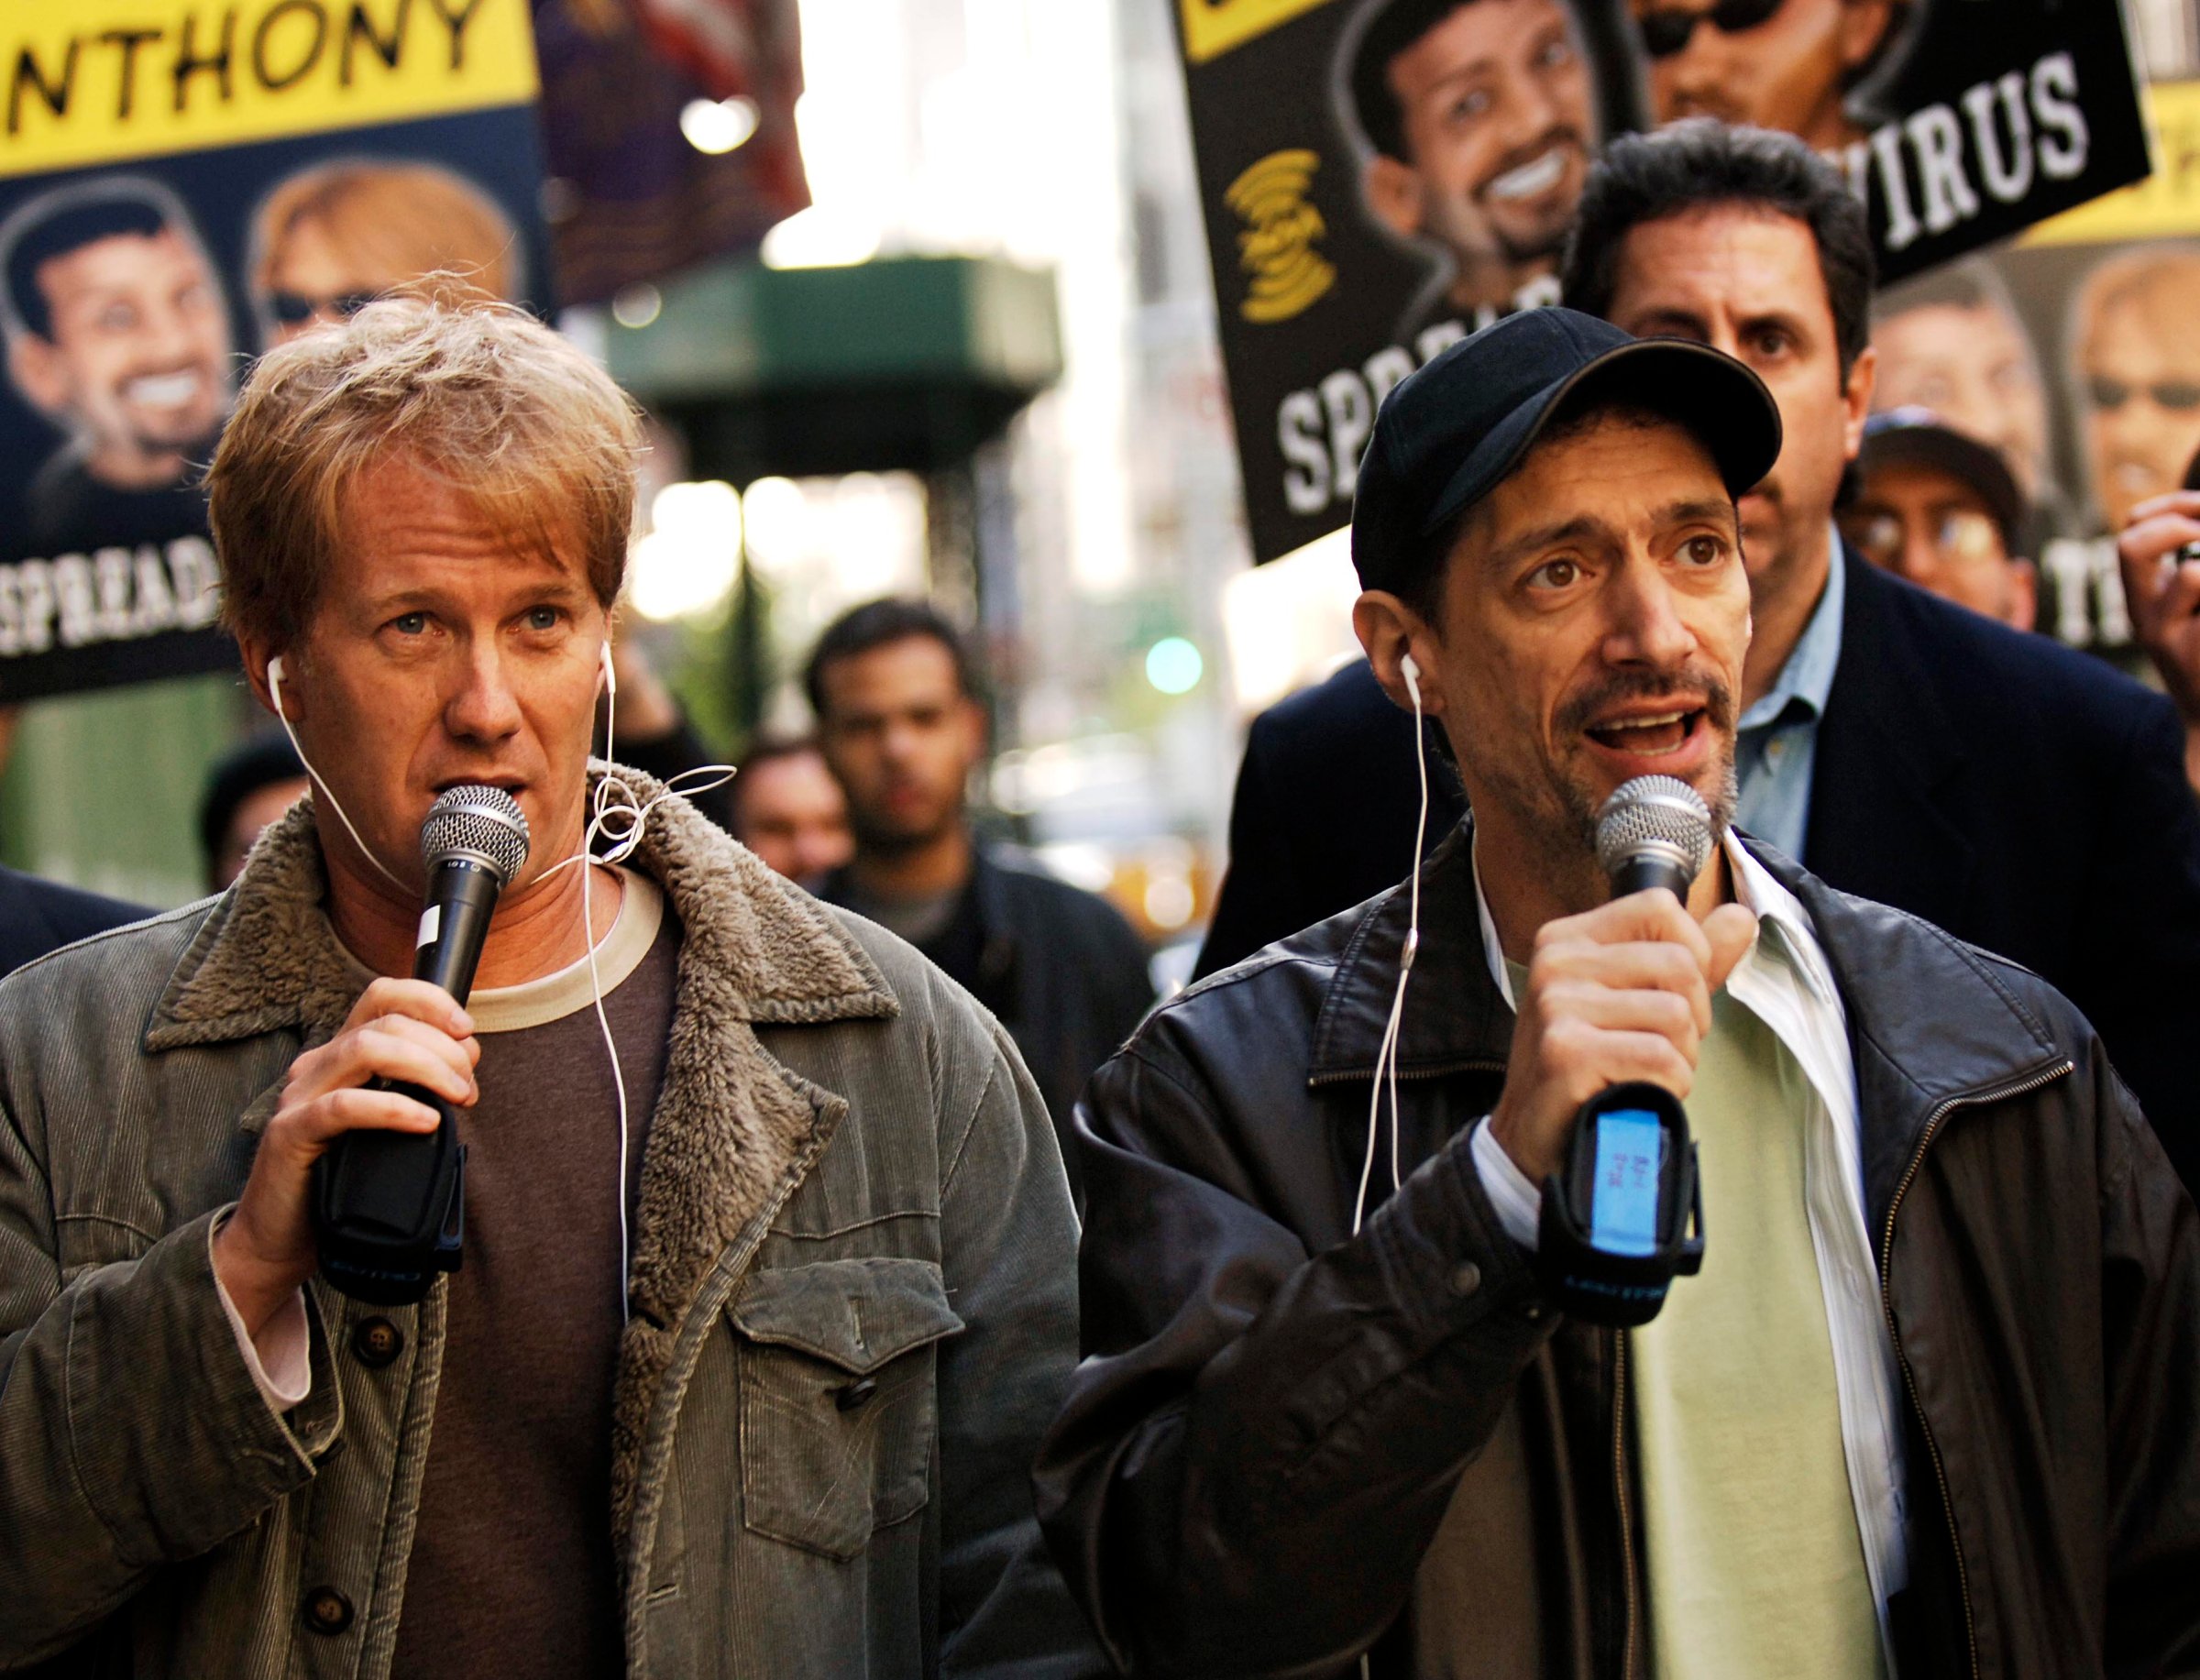 Radio shock jocks Greg "Opie" Hughes, left, and Anthony Cumia, right, leave CBS Radio studios on 57th Street with fans after finishing their first morning show, in New York. Cumia of the "Opie & Anthony" radio show on April 26, 2006.